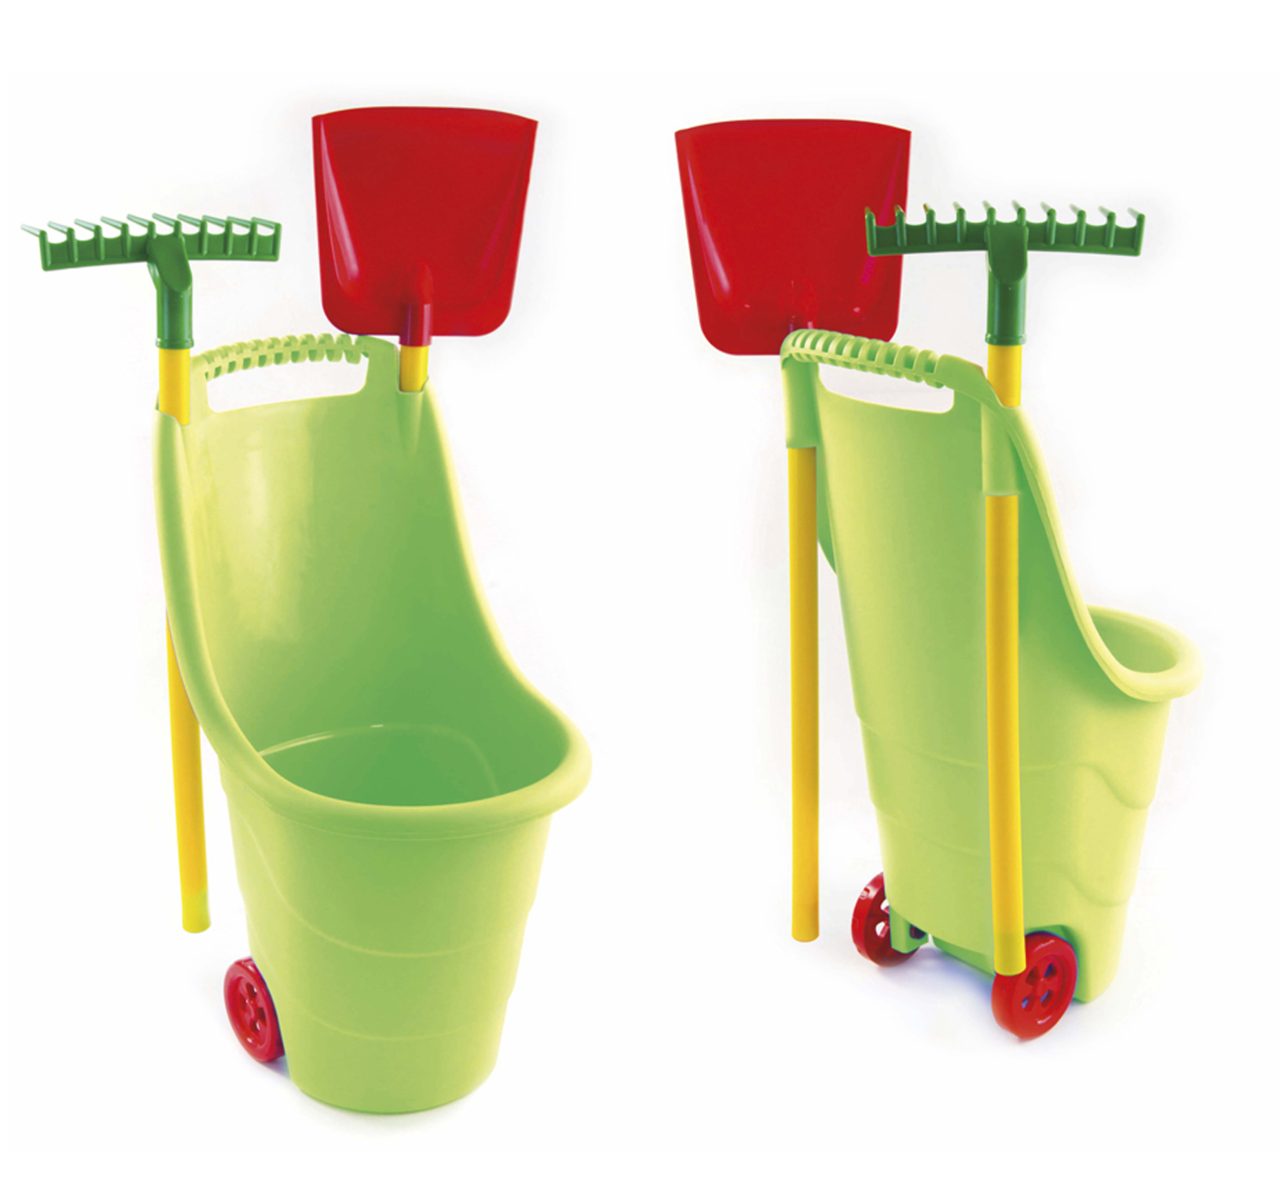 Toy Garden Trolley with Toy Garden Tools